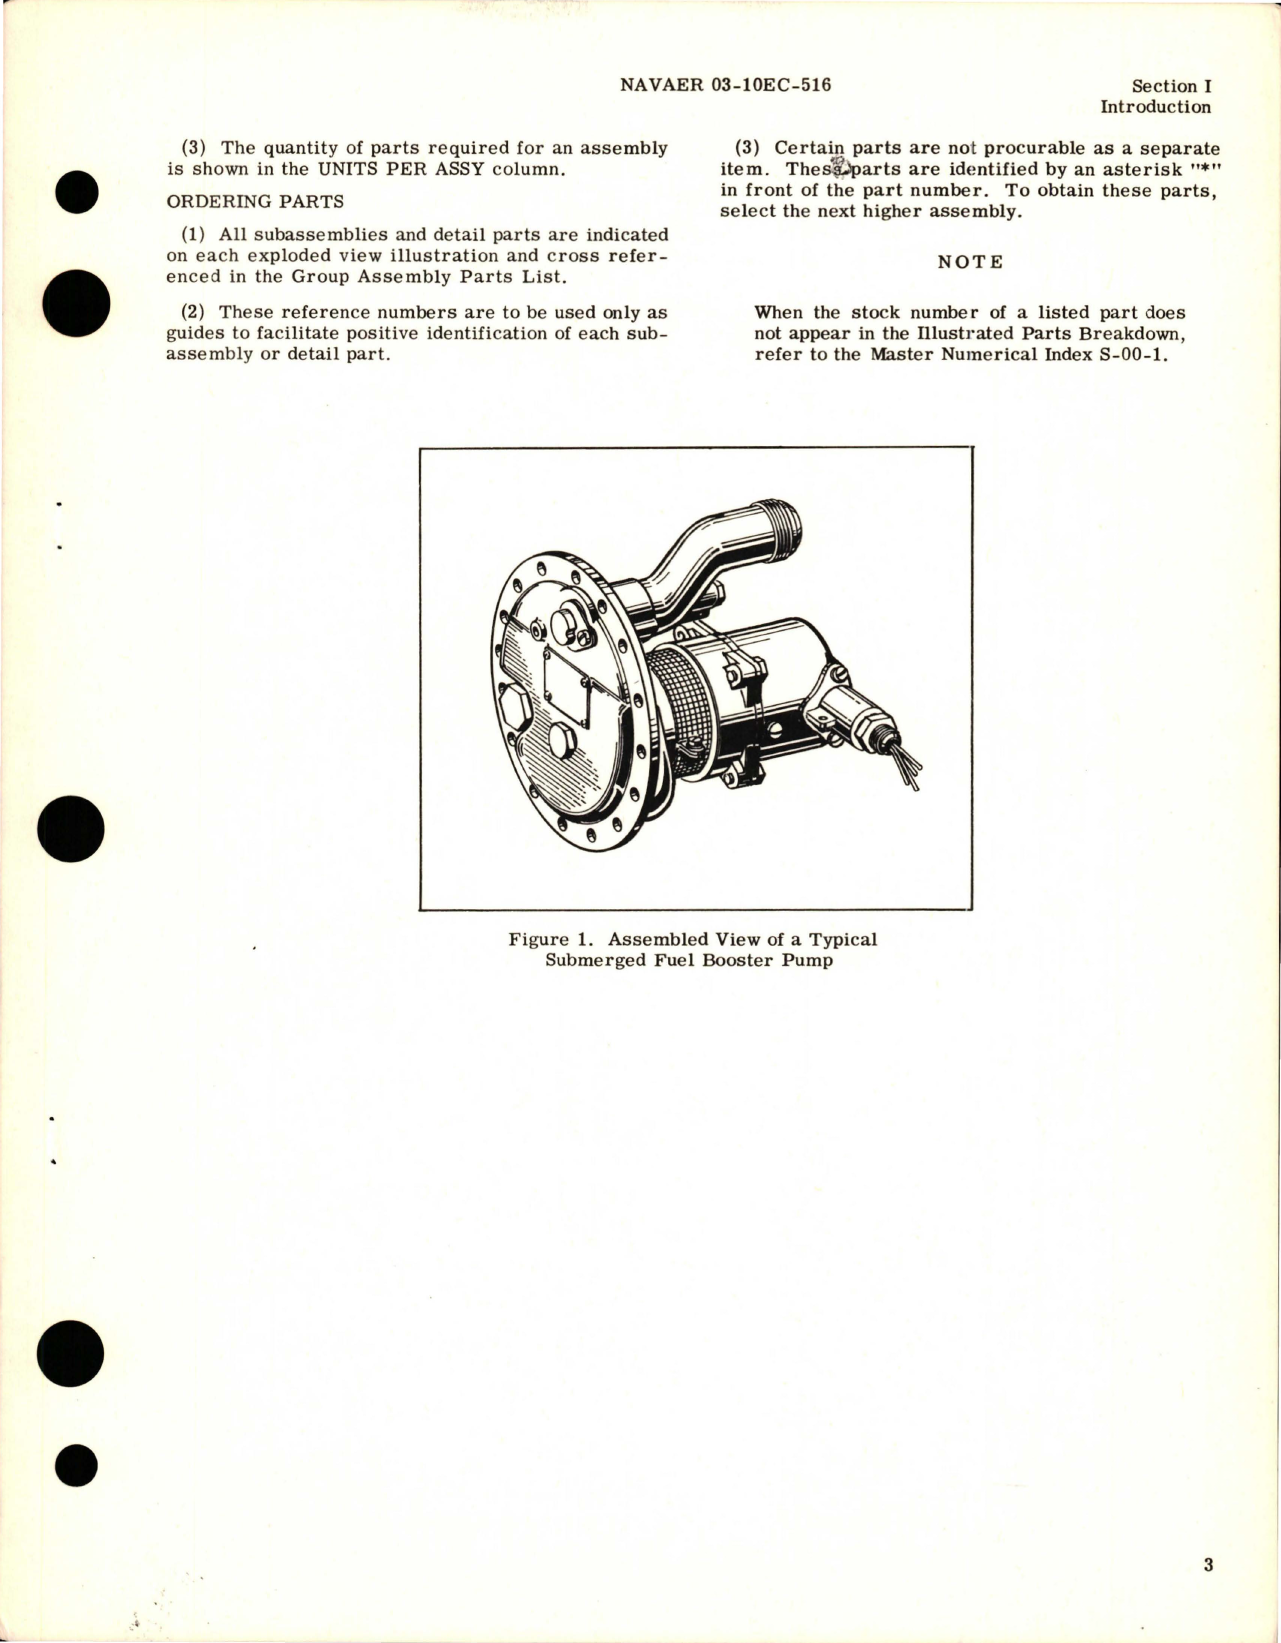 Sample page 5 from AirCorps Library document: Illustrated Parts Breakdown for Submerged Fuel Booster Pump